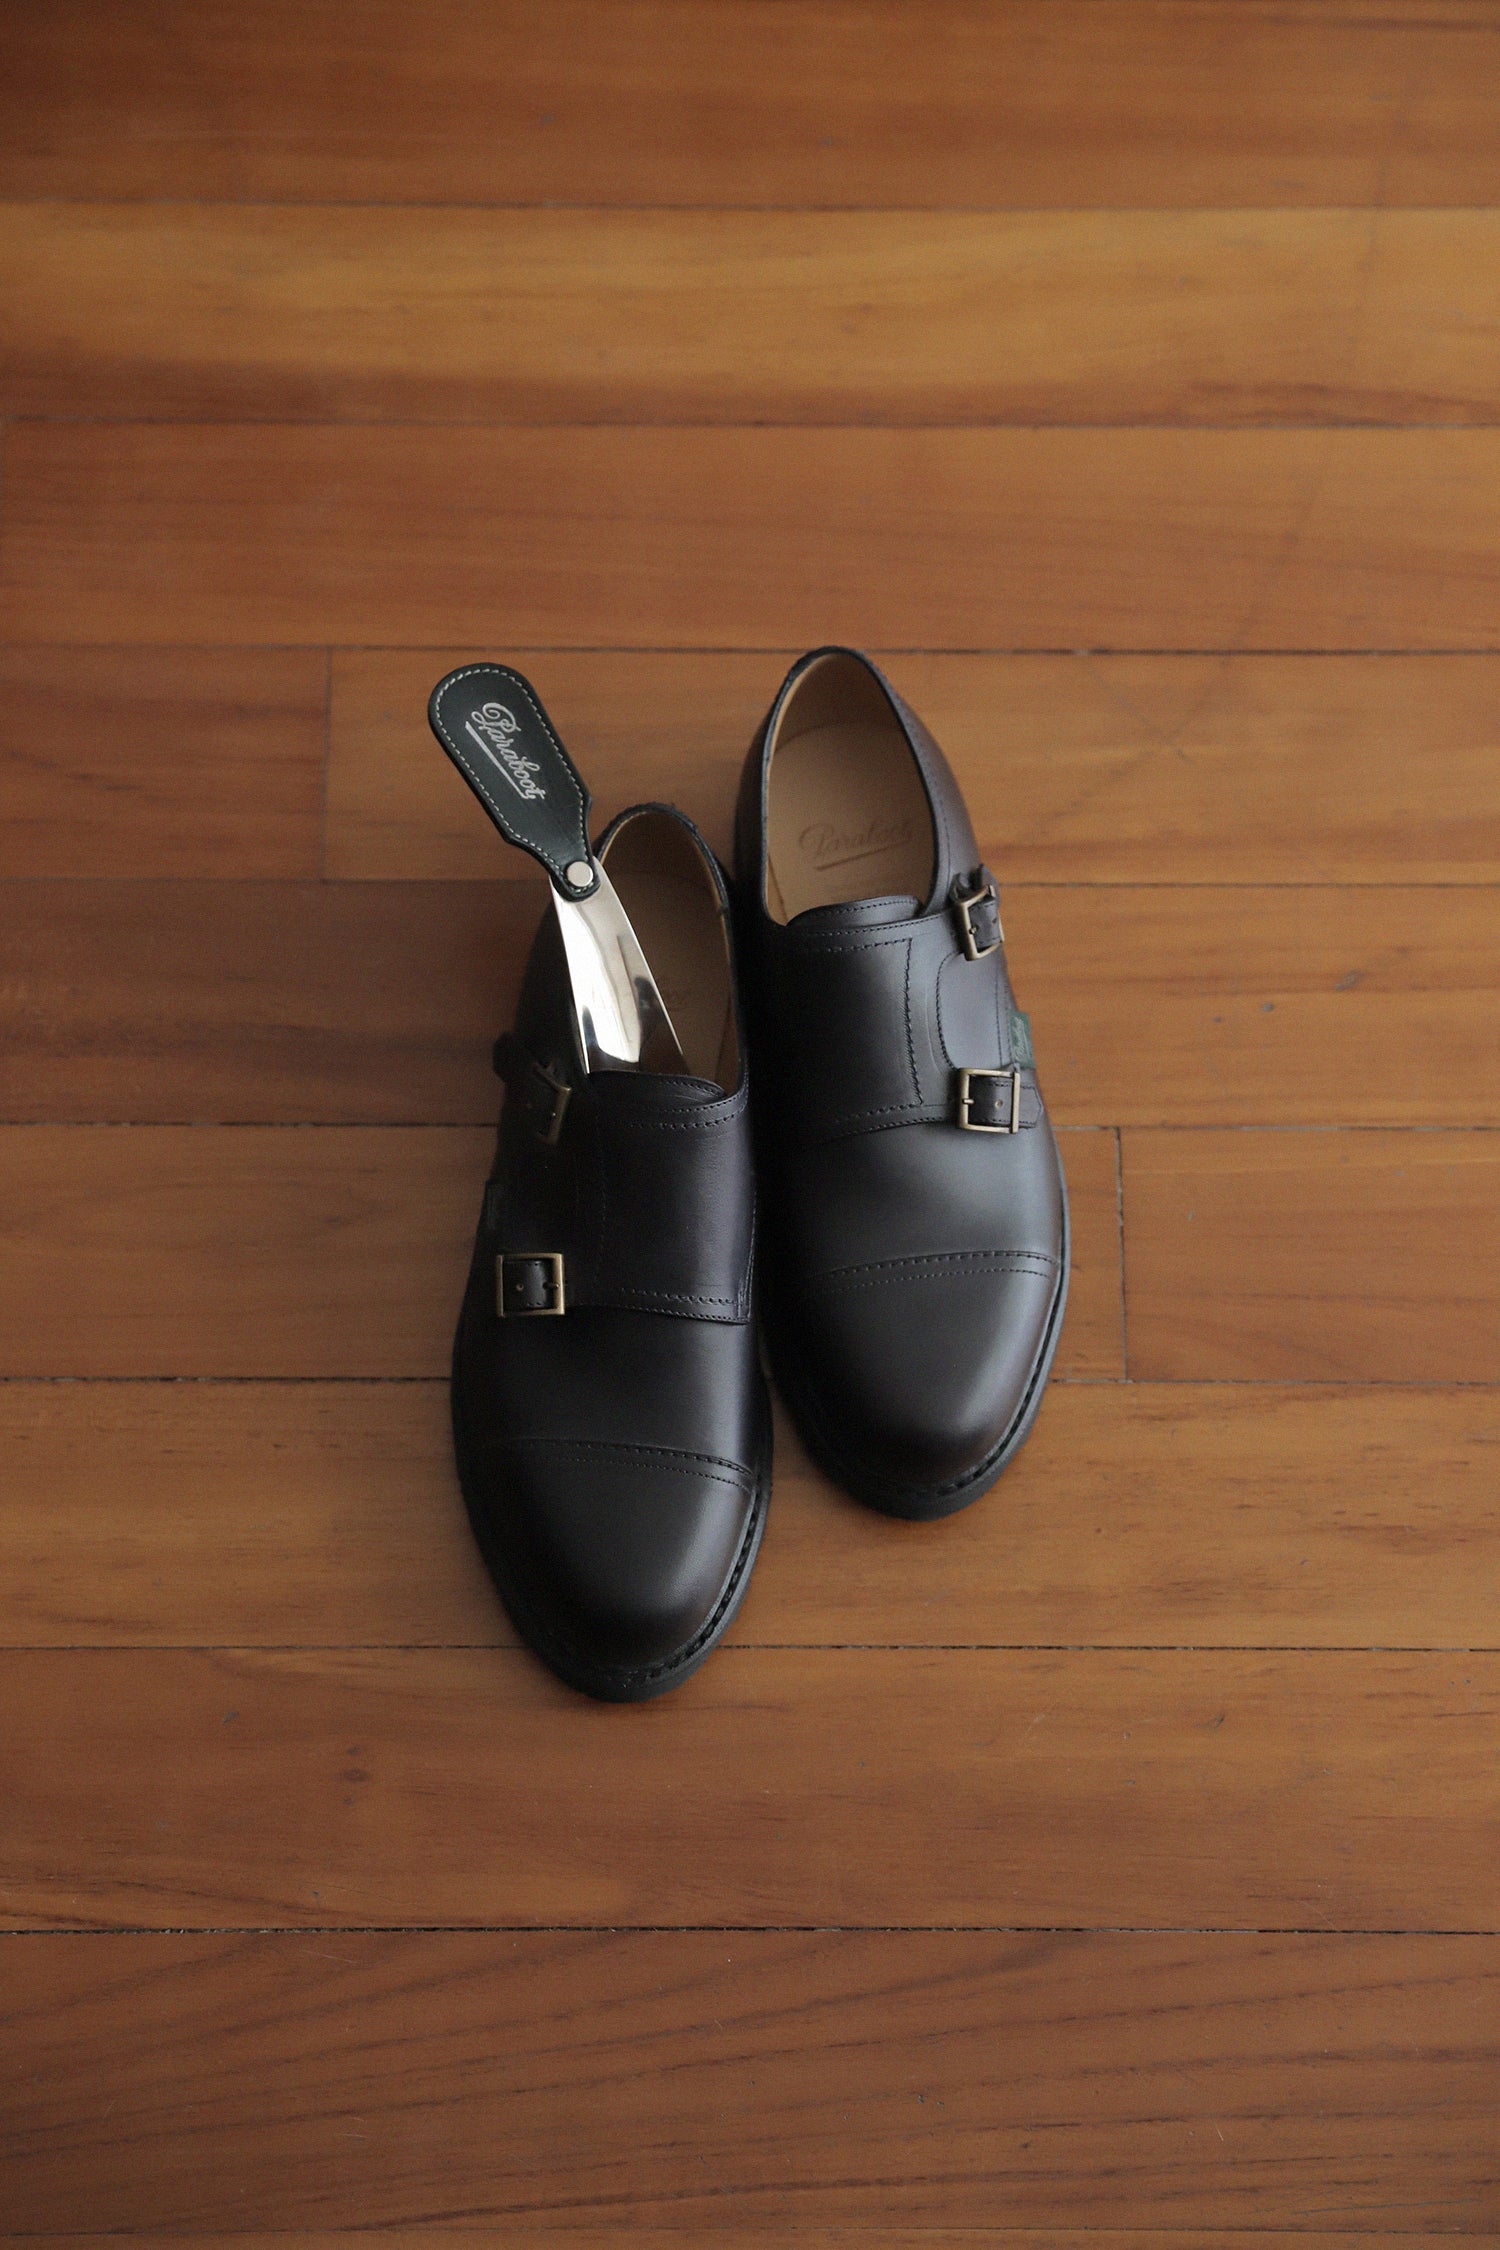 PARABOOT ACCESSORIES - Pocket shoehorn